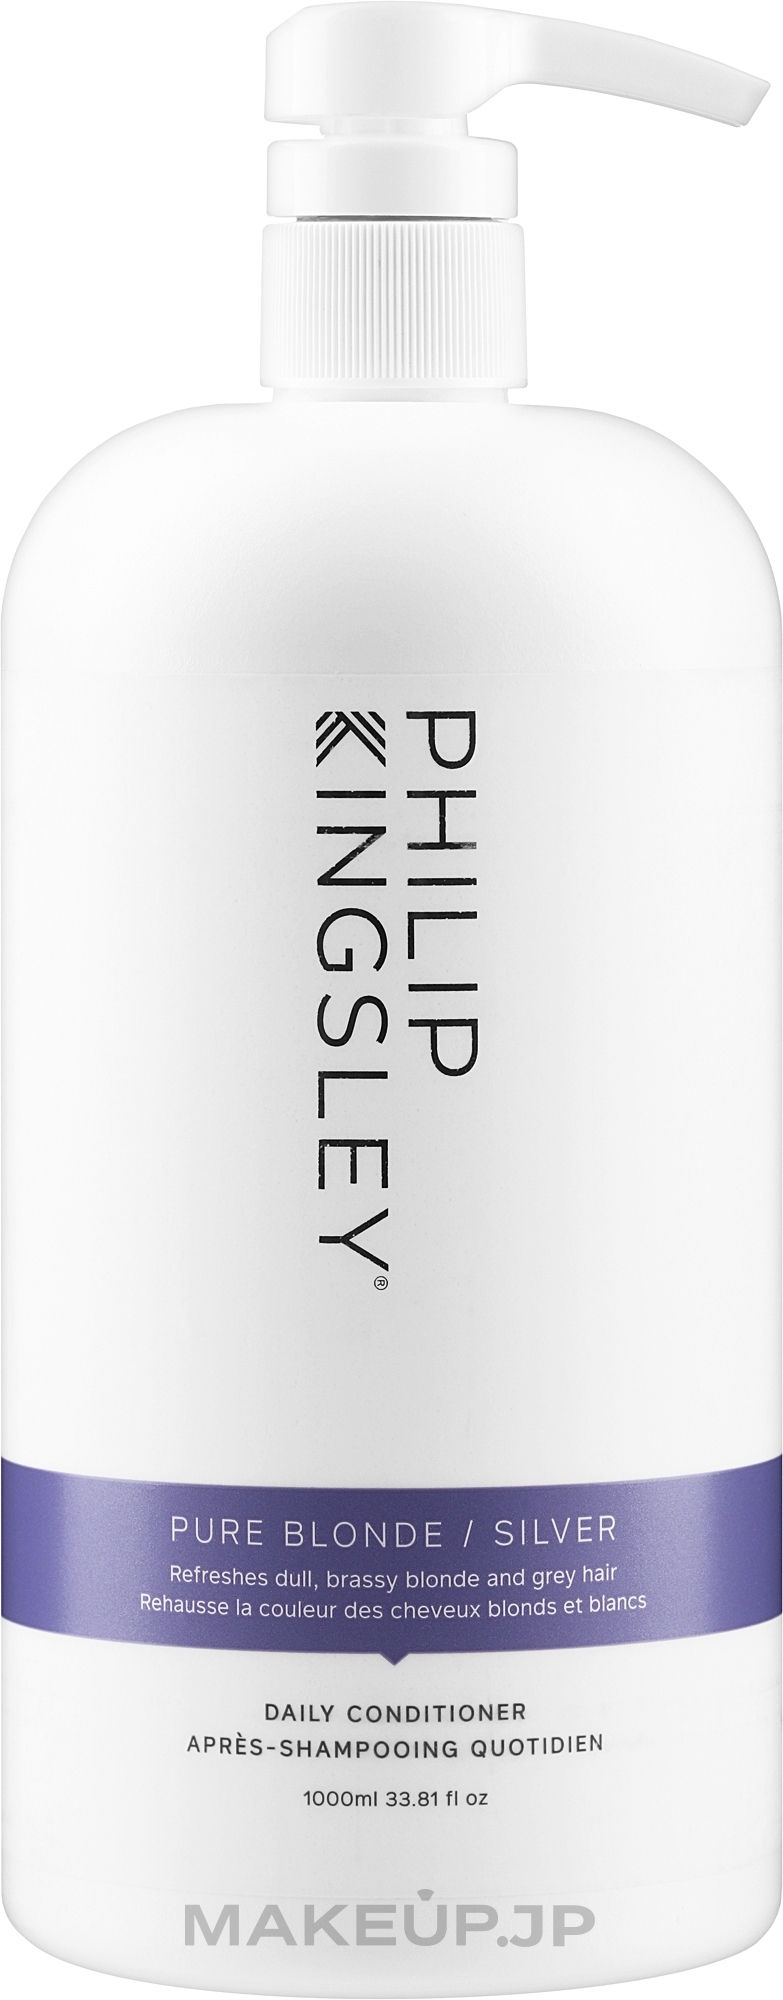 Conditioner for Cold Blonde - Philip Kingsley Pure Blonde/ Silver Brightening Daily Conditioner — photo 1000 ml